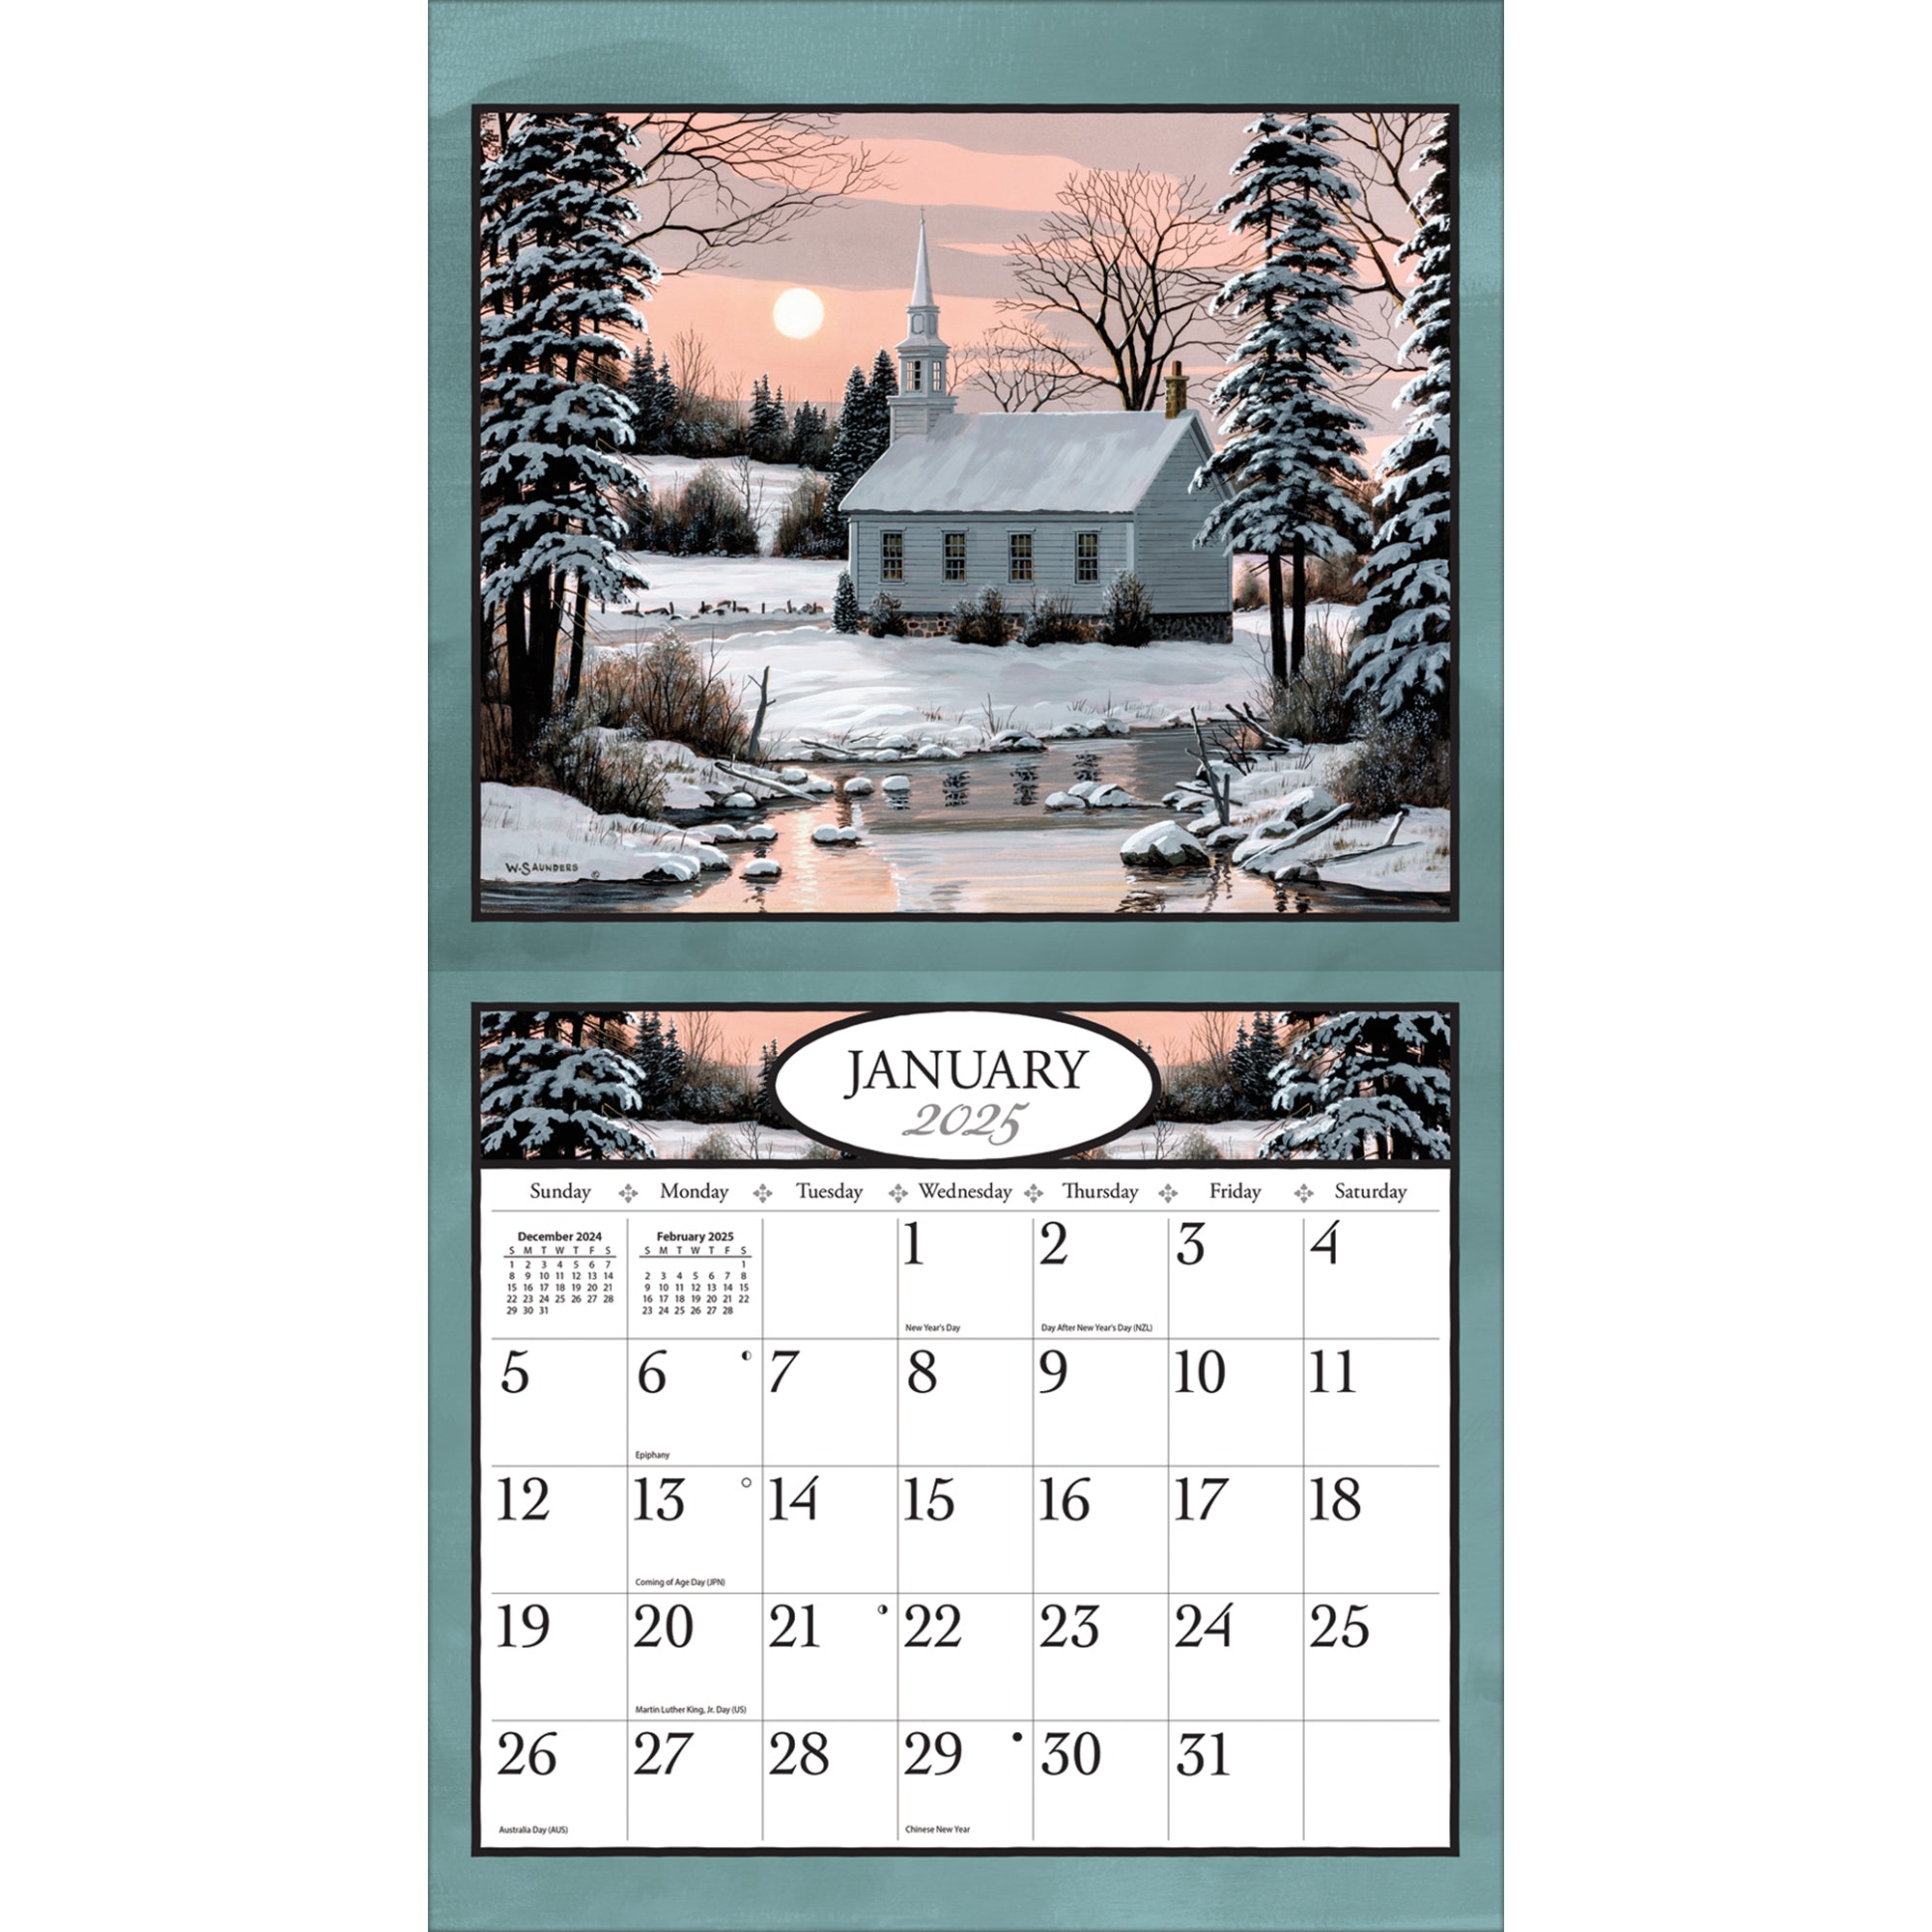 2025 Country Churches By Bill Saunders - LANG Deluxe Wall Calendar